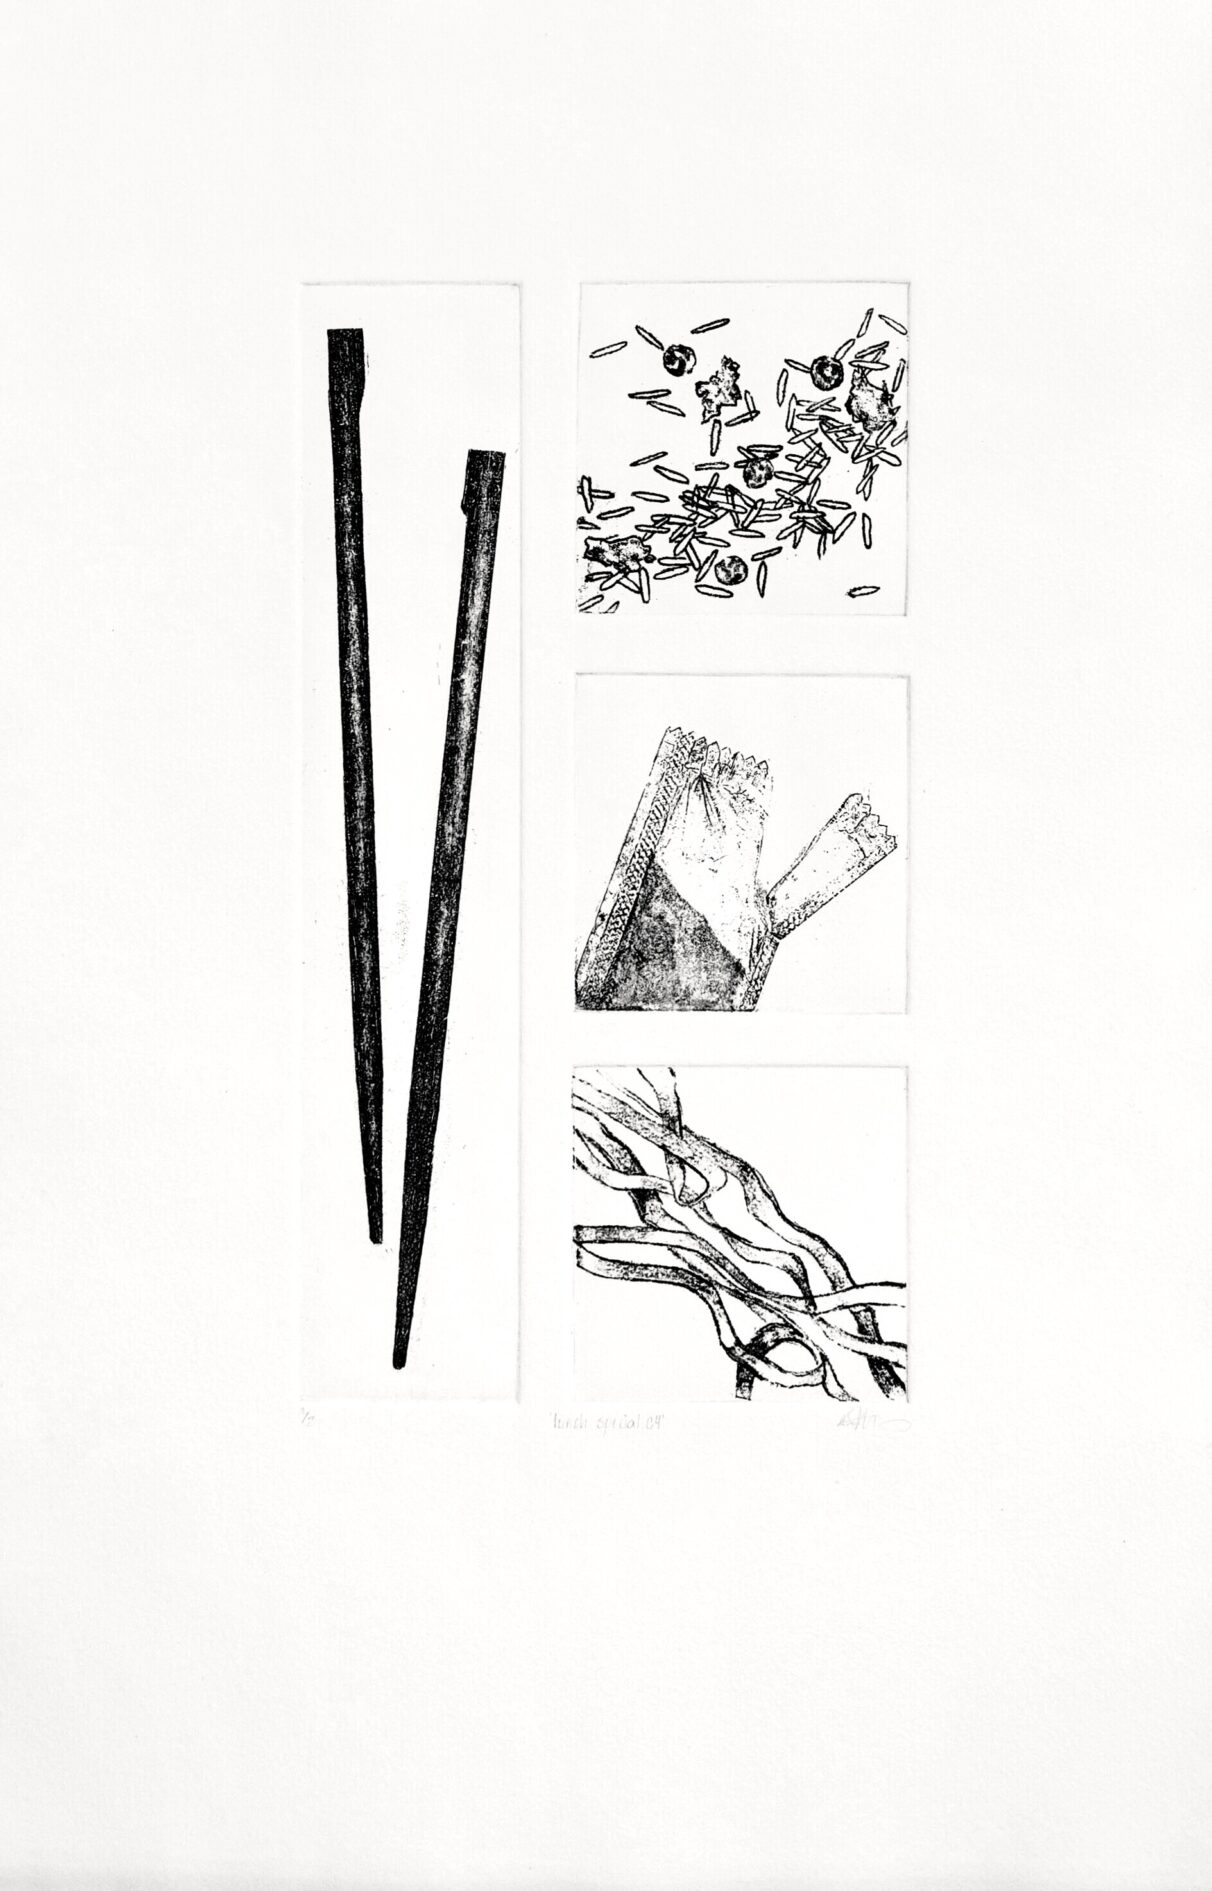 A print made up of four separate photos: chopsticks, food flying through the air, an open packet of liquid and noodles.